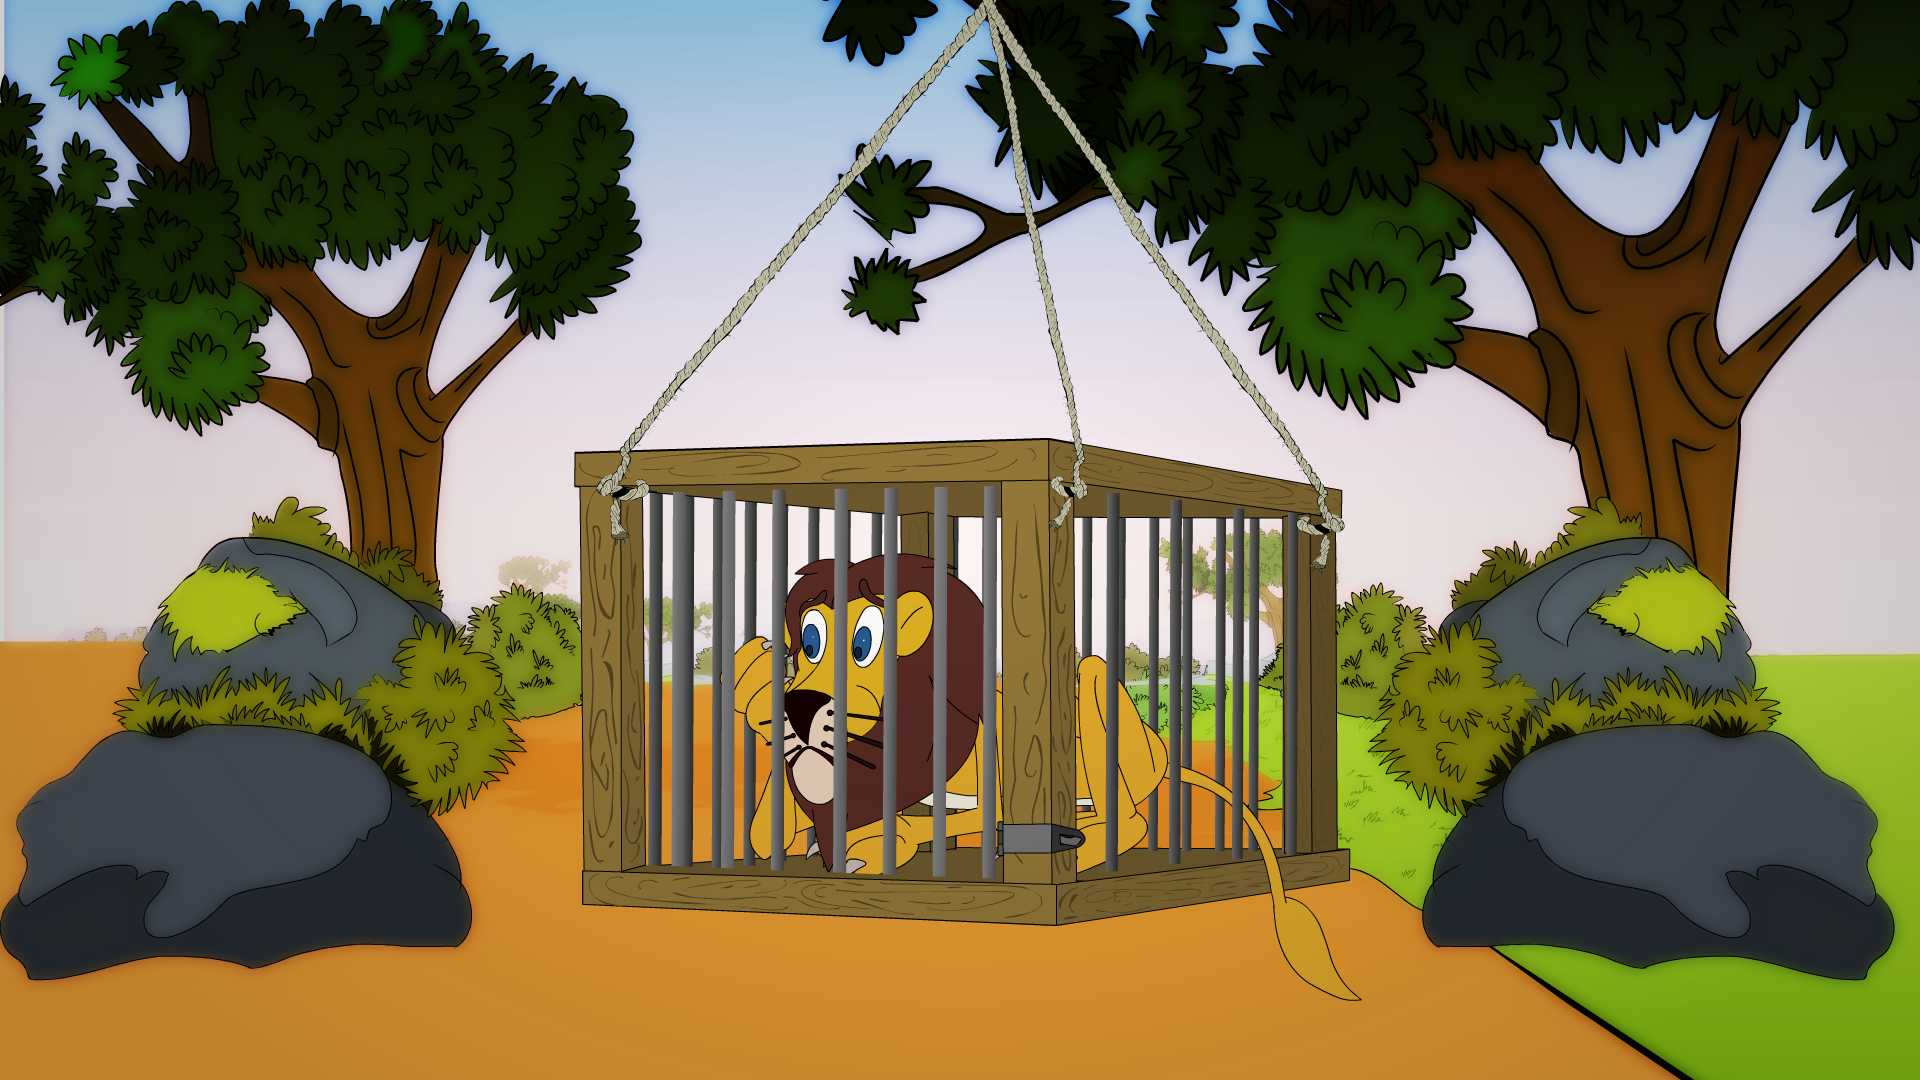 The caged lion story. Once upon a time there lived a ferocious and cruel lion in the forest. He was very rude and used to kill all the animals in the forest. 